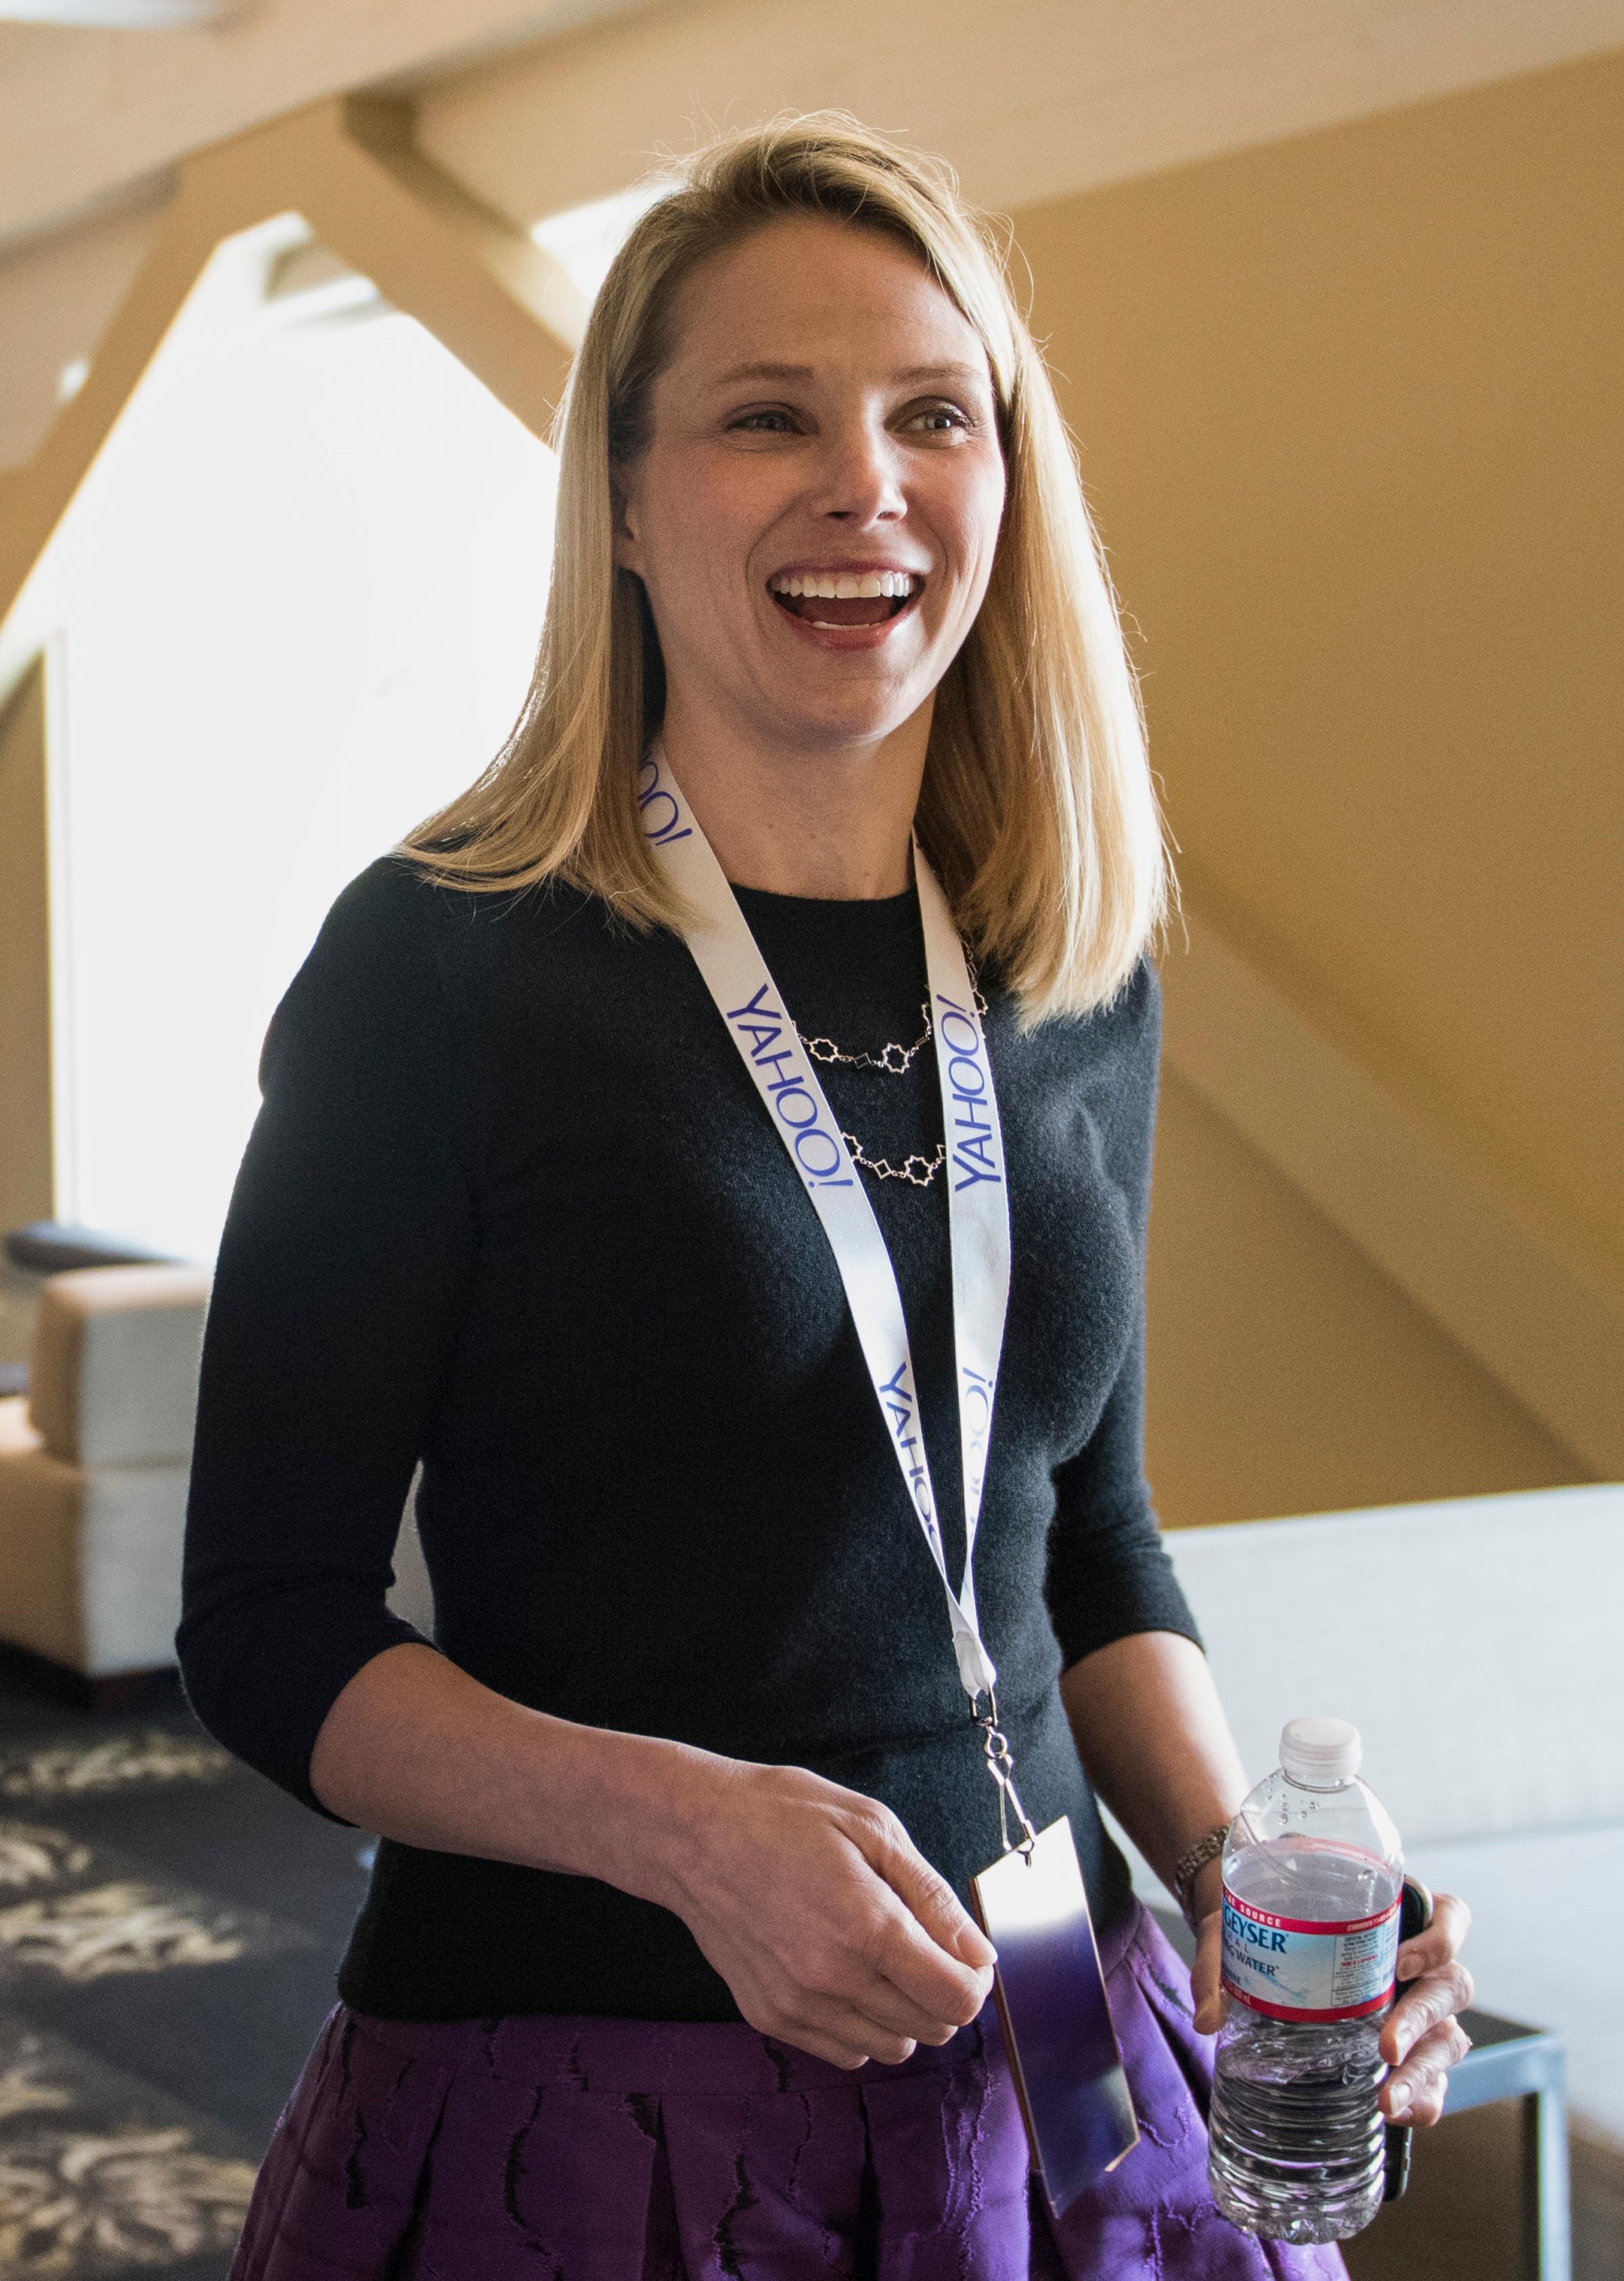 Marissa Mayer at the Yahoo! Inc. Mobile Developer Conference in San Francisco on Feb. 19, 2015.